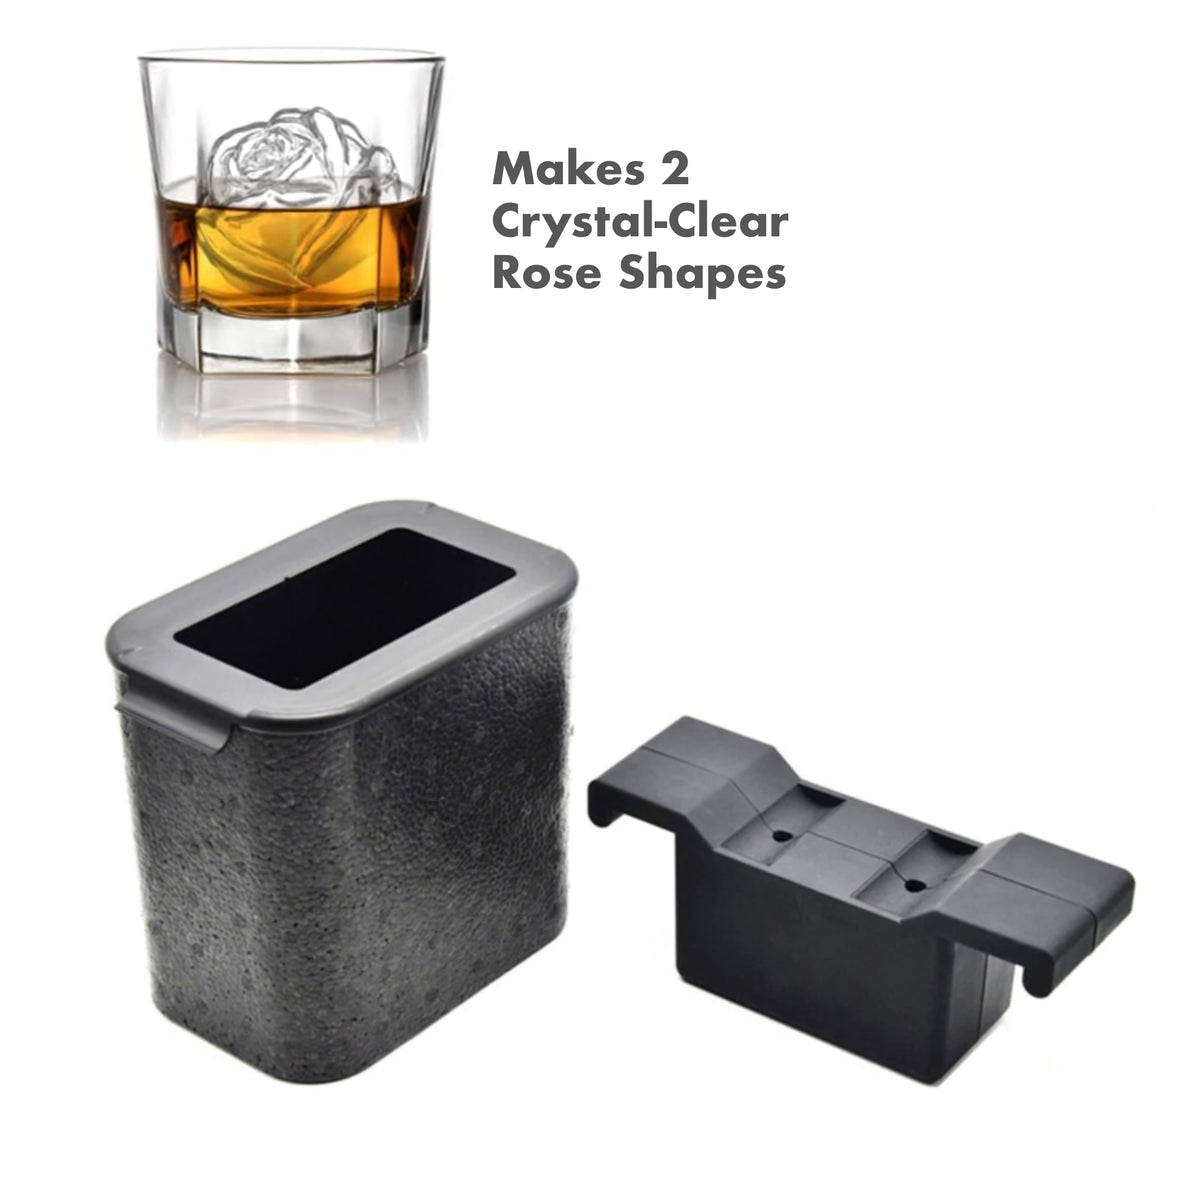 Clear Diamond Ice Mold, Craft Cocktail & Whiskey Ice